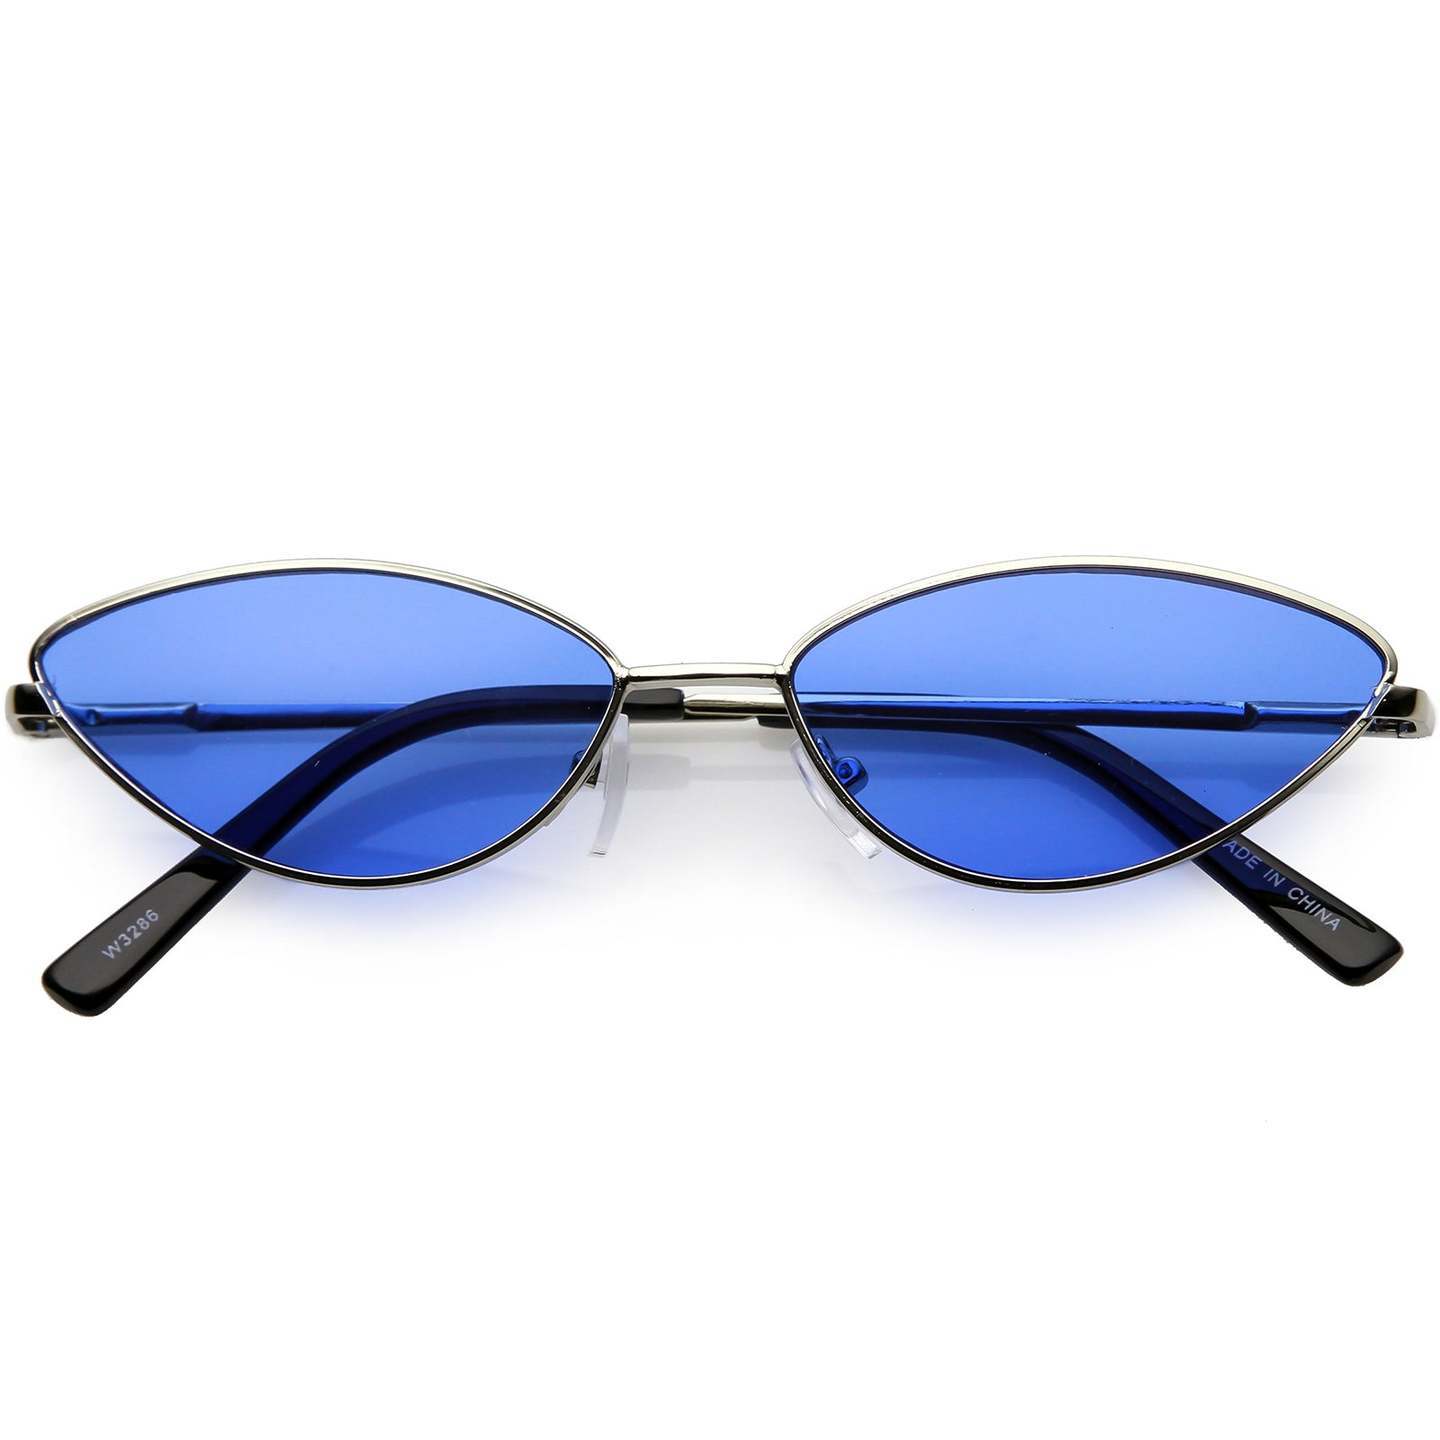 RETRO SMALL METAL CAT EYE SUNGLASSES FOR WOMEN BLUE COLOR TINTED LENS